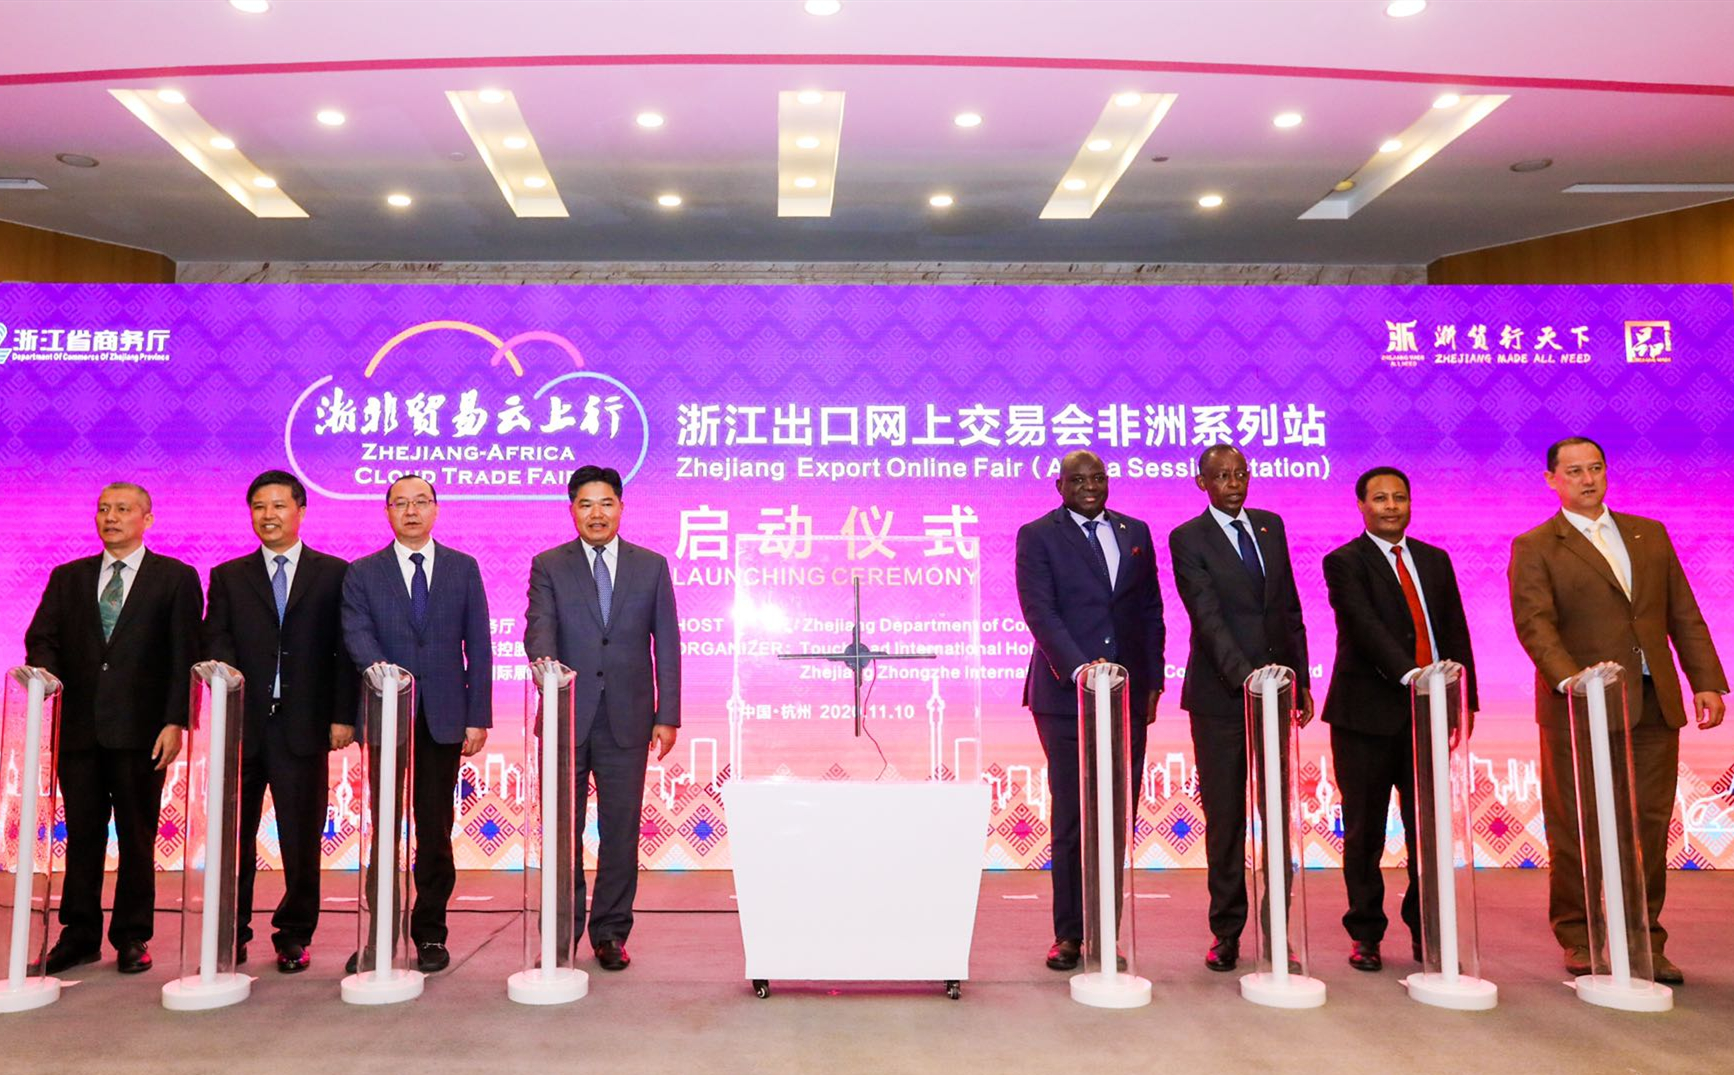 Zhejiang targets African markets with ongoing online trade fair